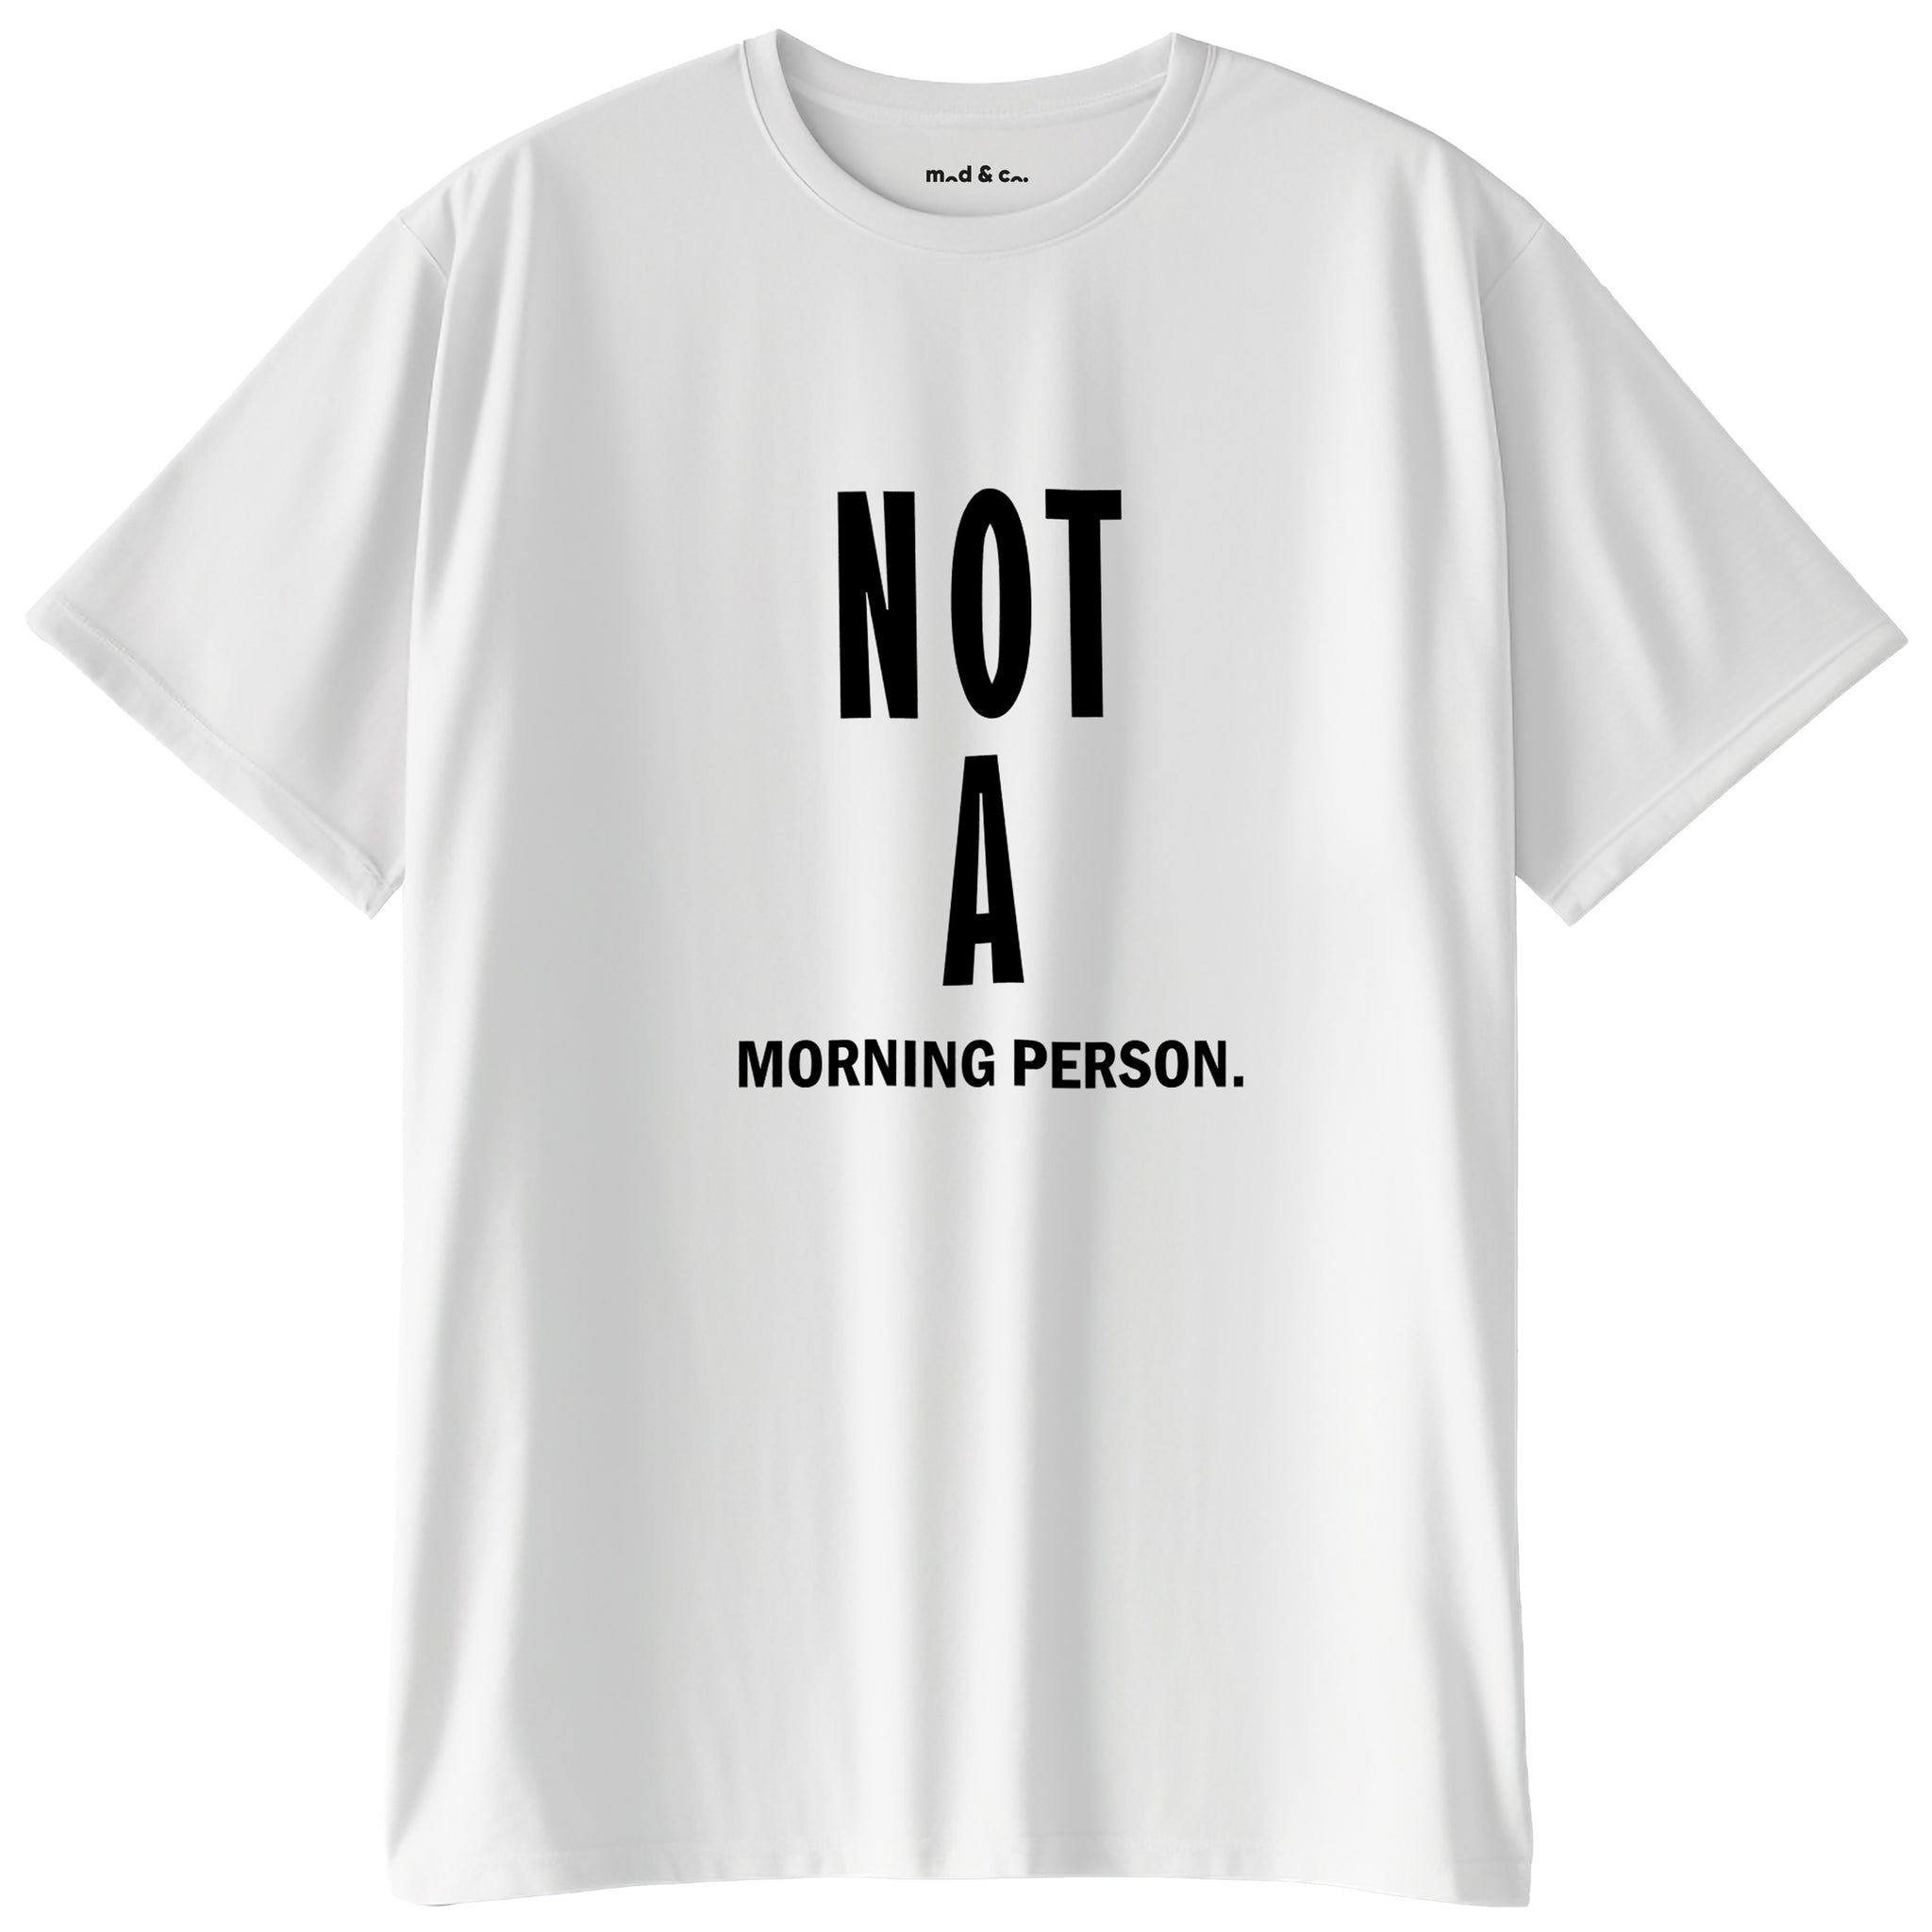 Not a Morning Person Oversize T-Shirt